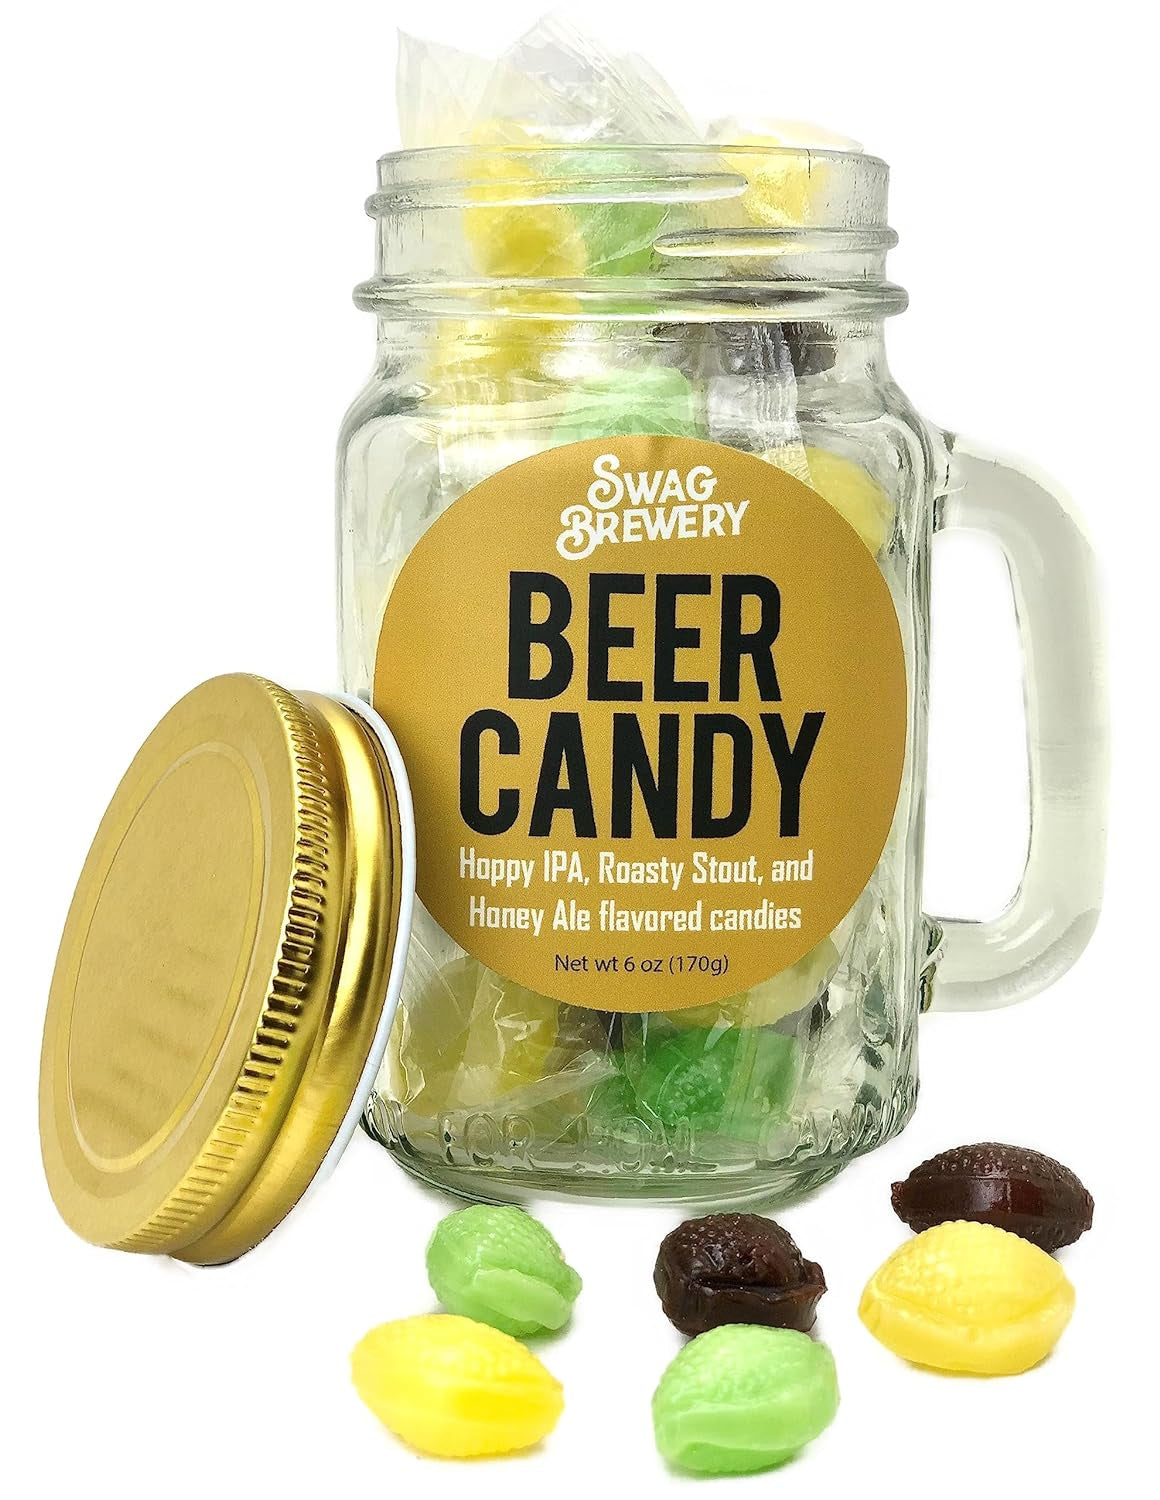 BREW CANDY | Hoppy IPA + Roasty Stout + Honey Ale | Great Craft Beer Gift for Beer Drinkers and Candy Lovers | Perfect for the Man Cave, Brewery, Office, or Home | MADE in USA